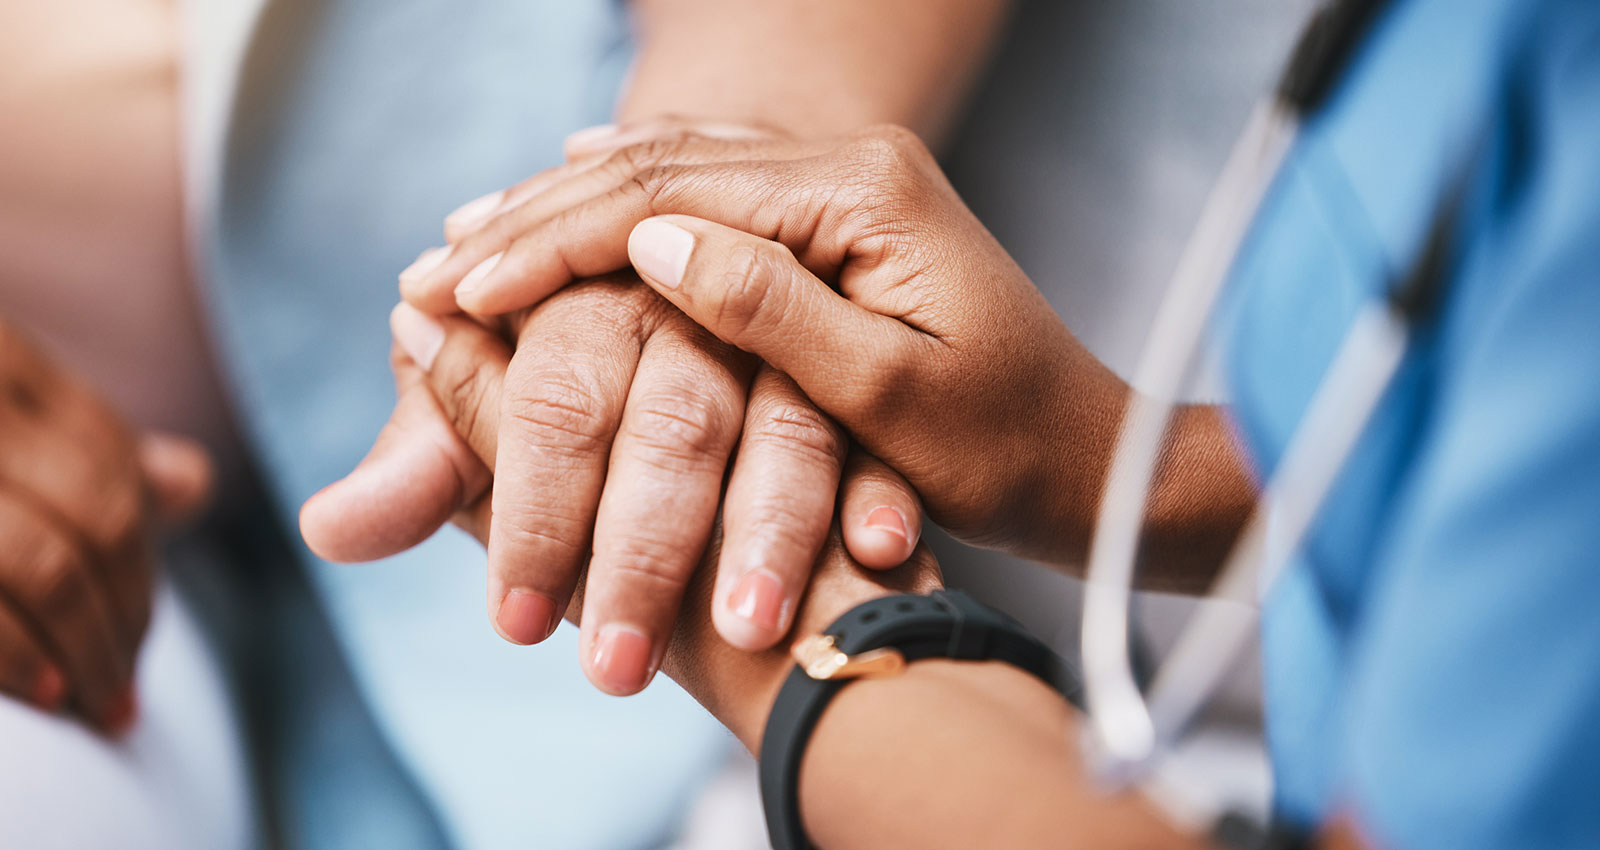 Empathy, trust and nurse holding hands with patient for help, support and support and healthcare advice. Kindness, counseling and medical therapy in nursing home for hope, consultation and psychology